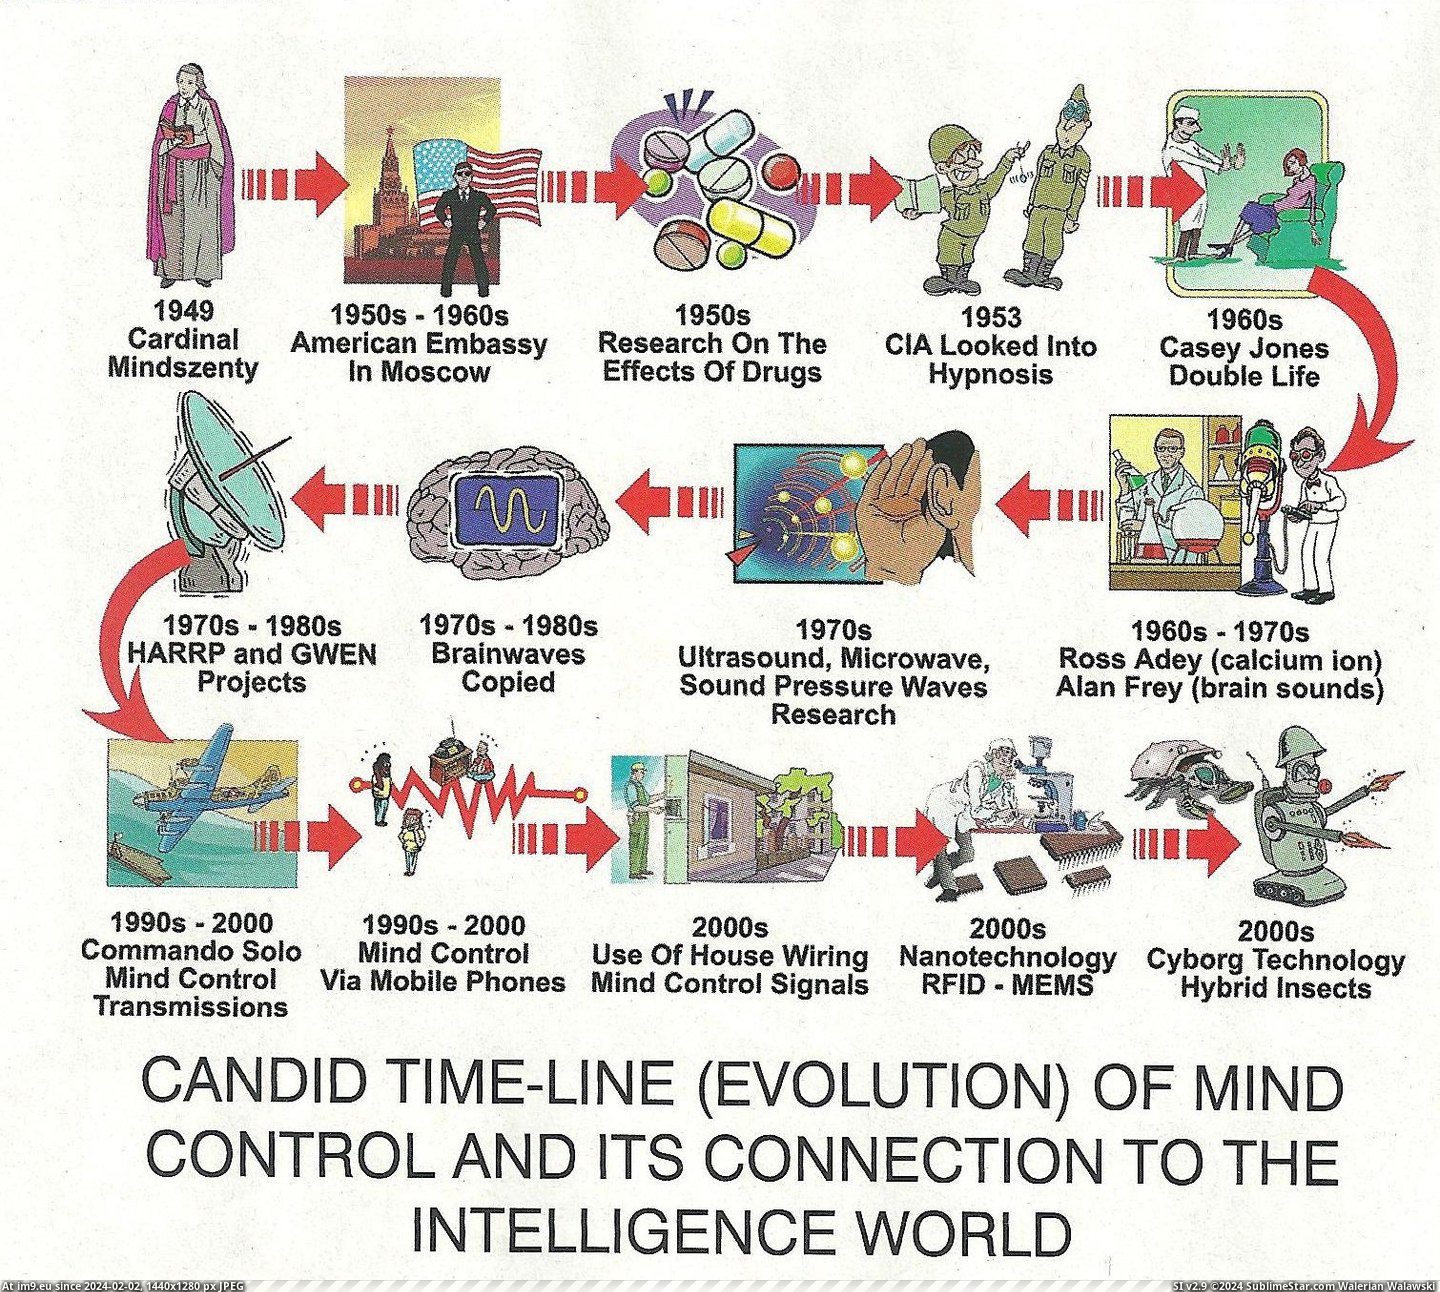 Timeline Emf Mind Control (in Zionist Conspiracy Pics)